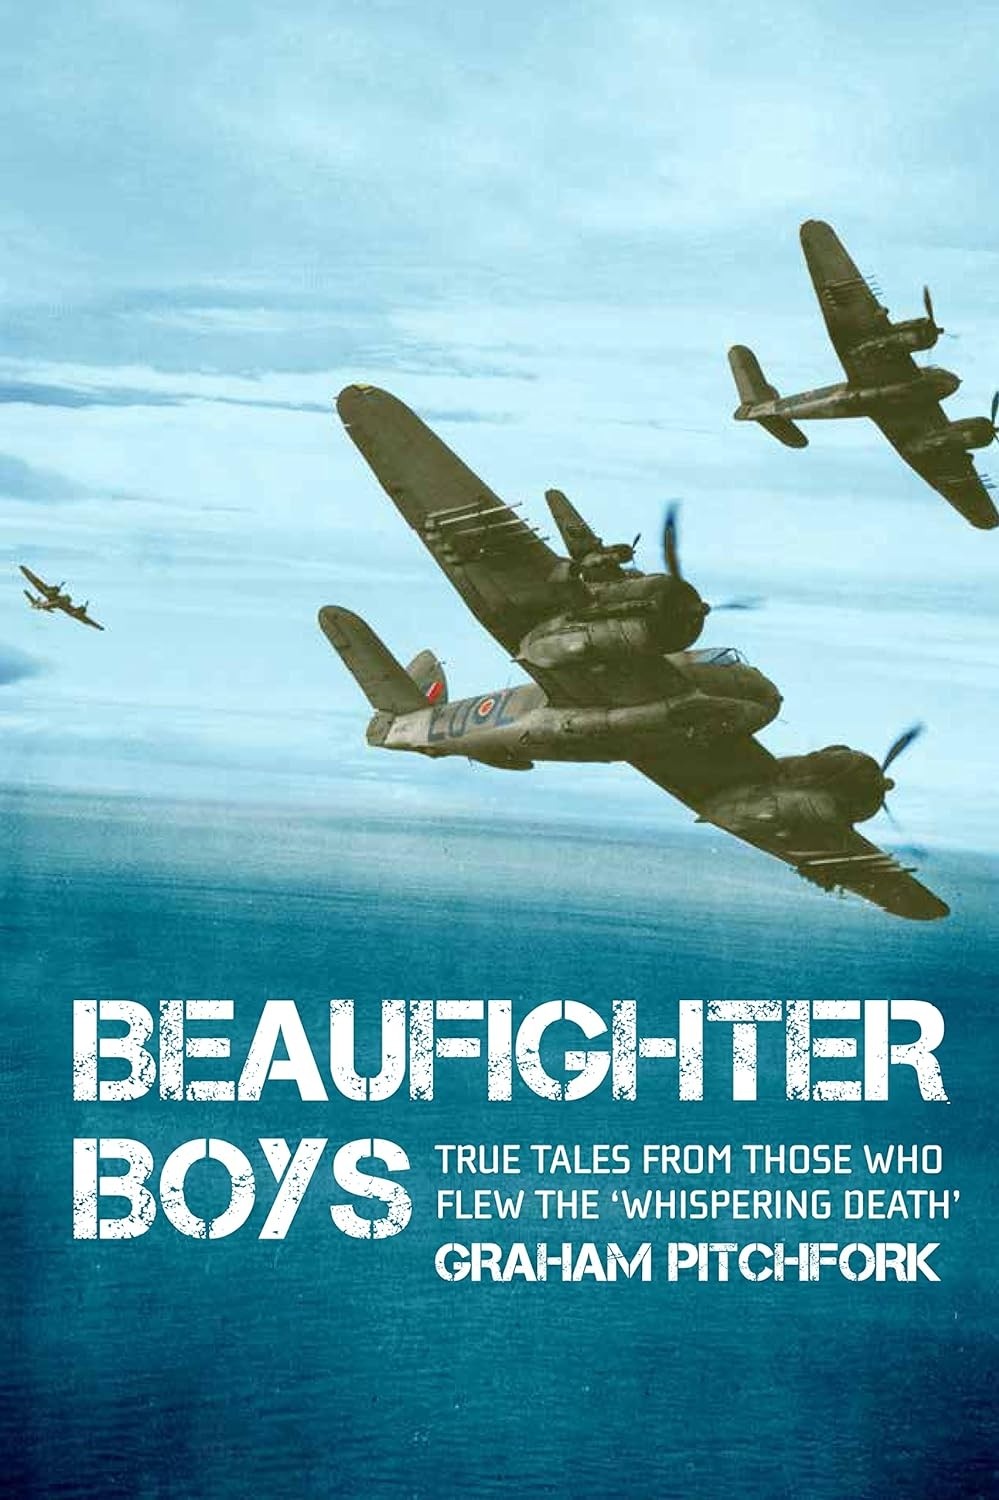 Beaufighter Boys: True Tales from those who flew Bristol's Mighty Twin